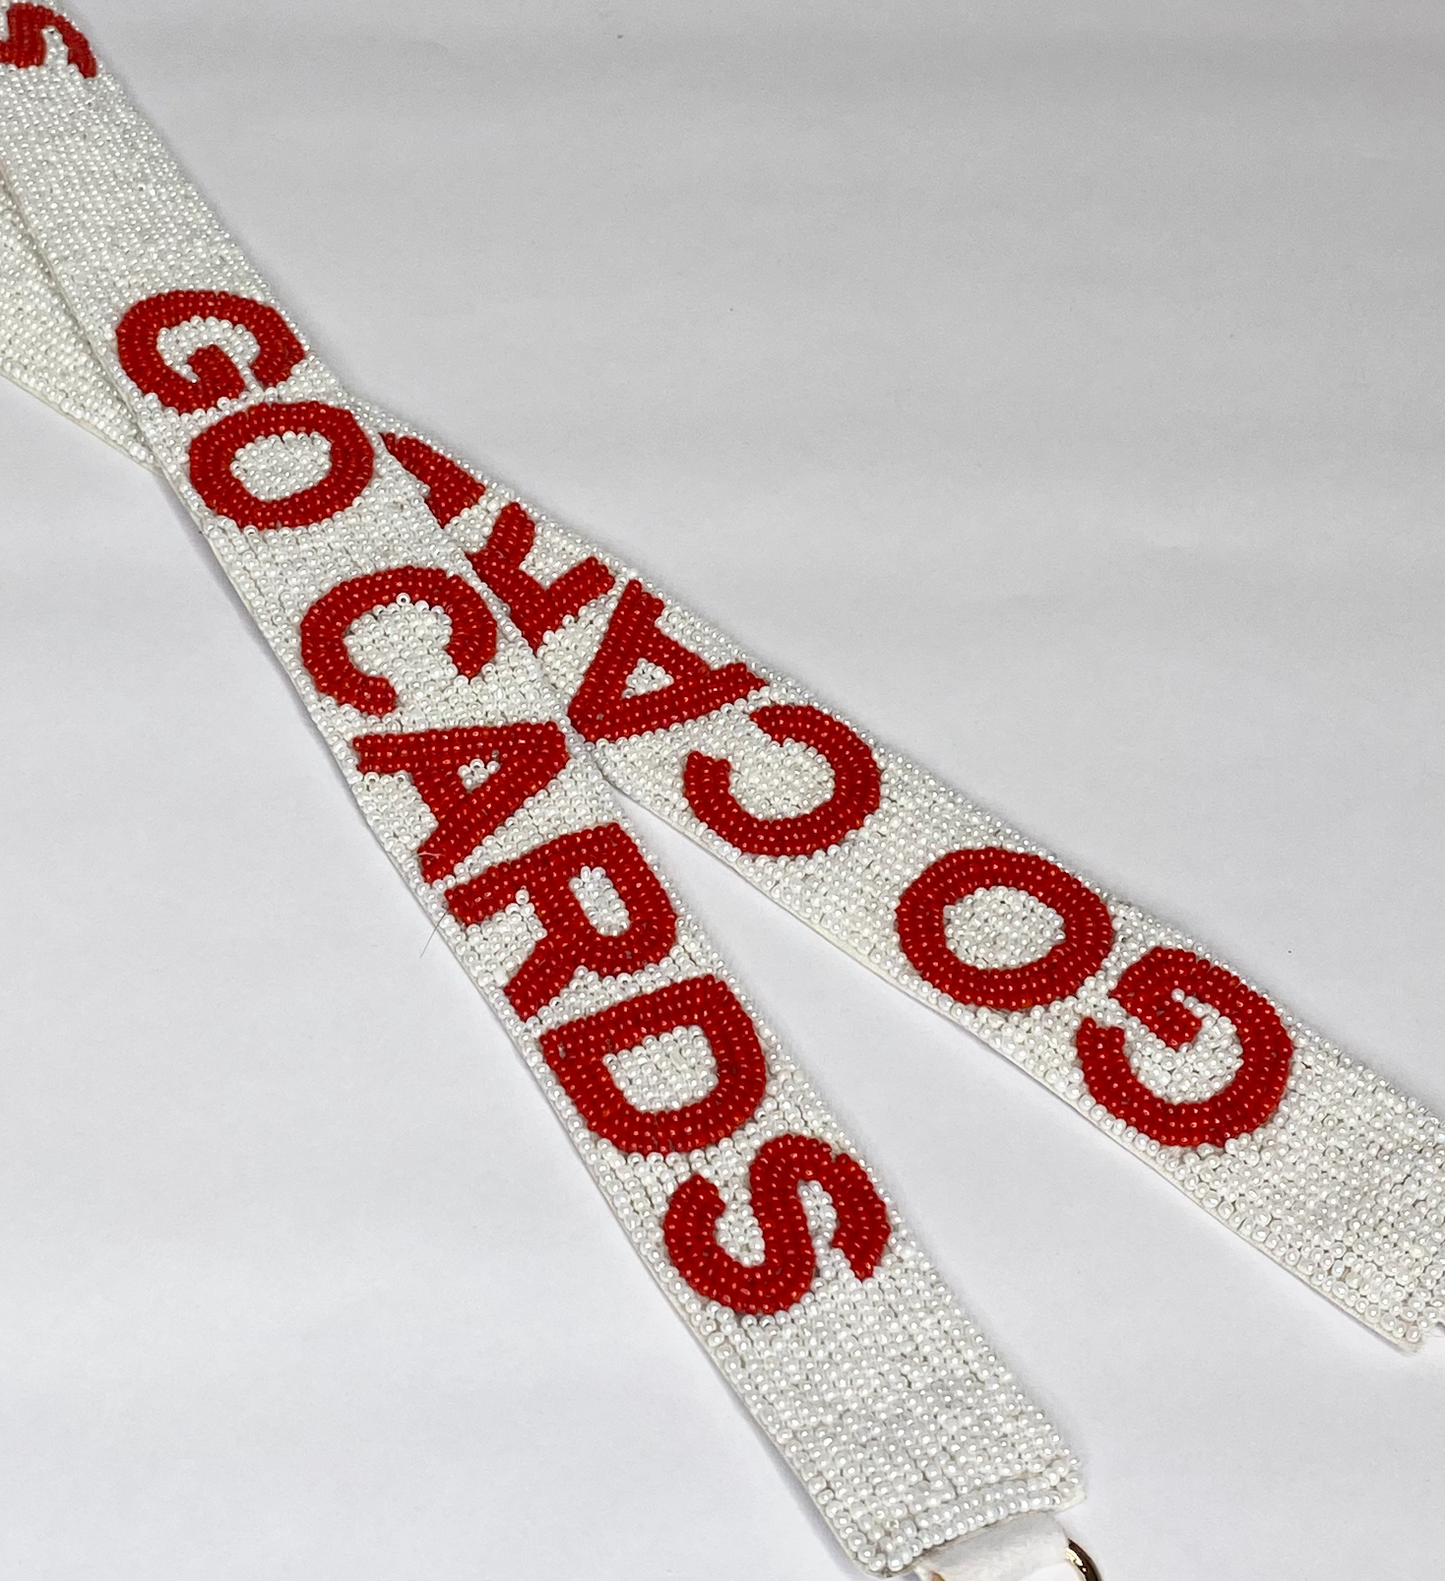 Louisville Go Cards Strap (Strap only)